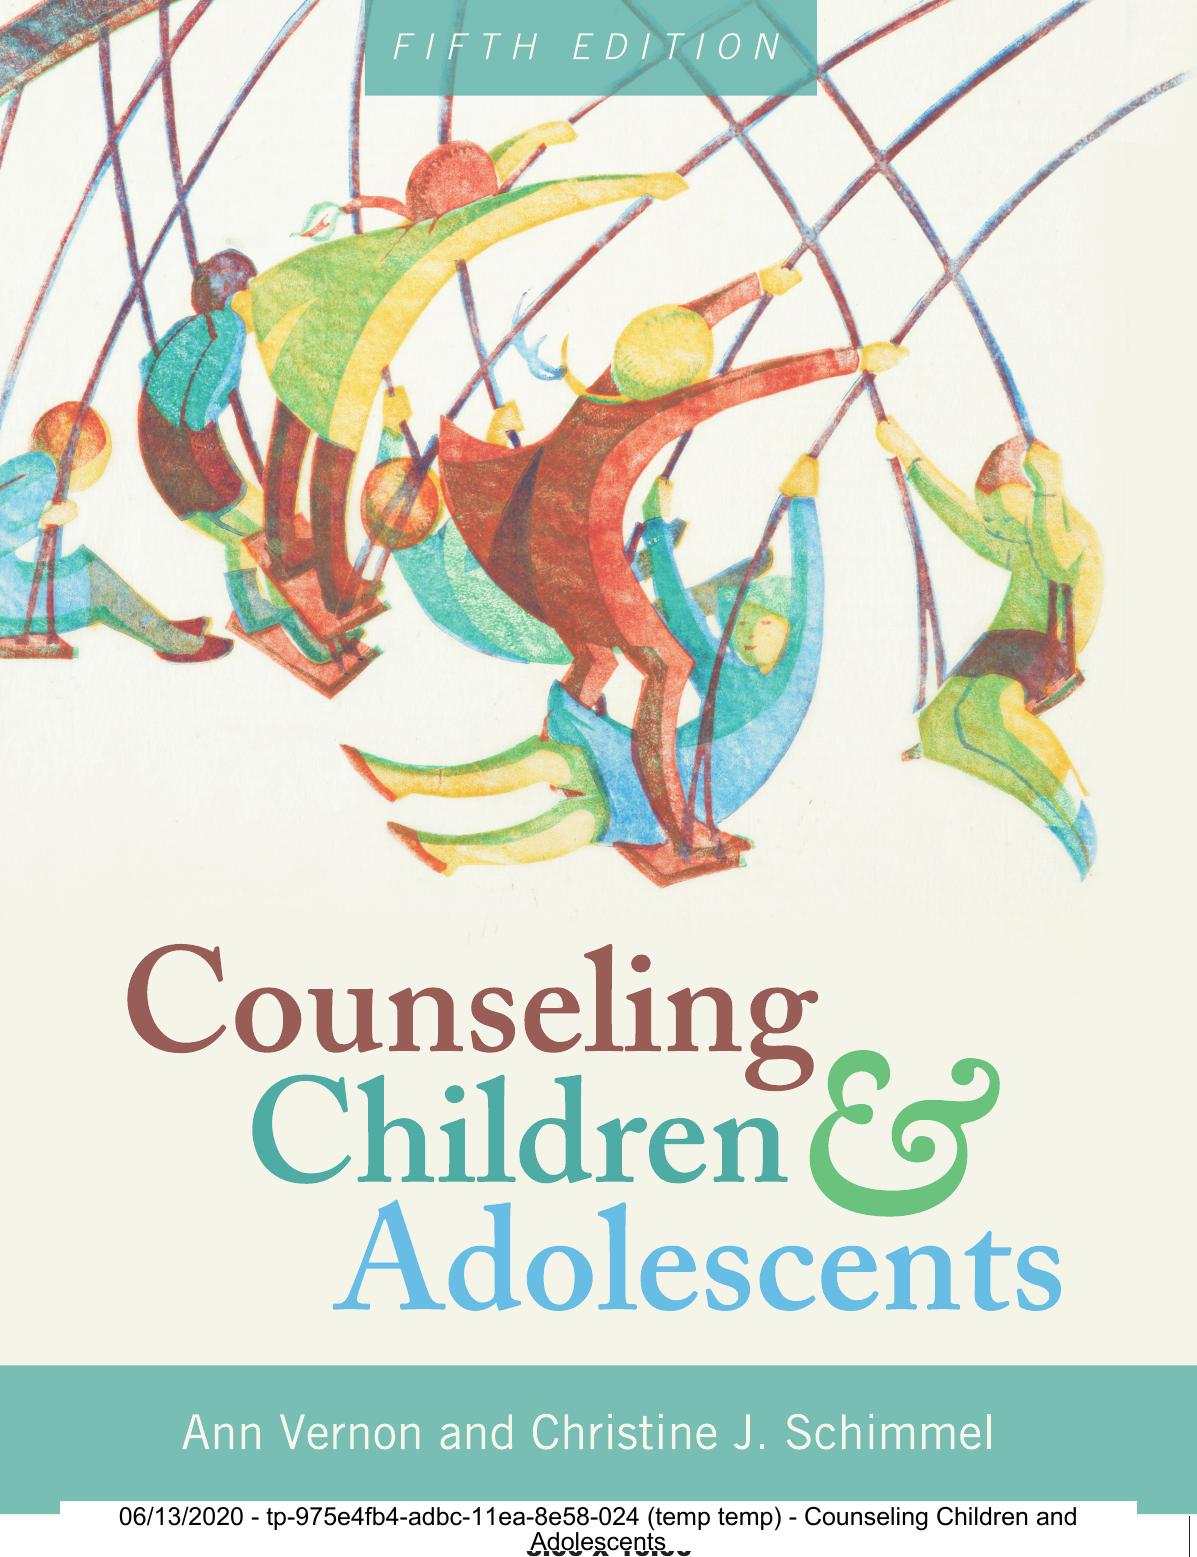 Counseling Children and Adolescents 5th Edition by Ann Vernon , Christine J. Schimmel 